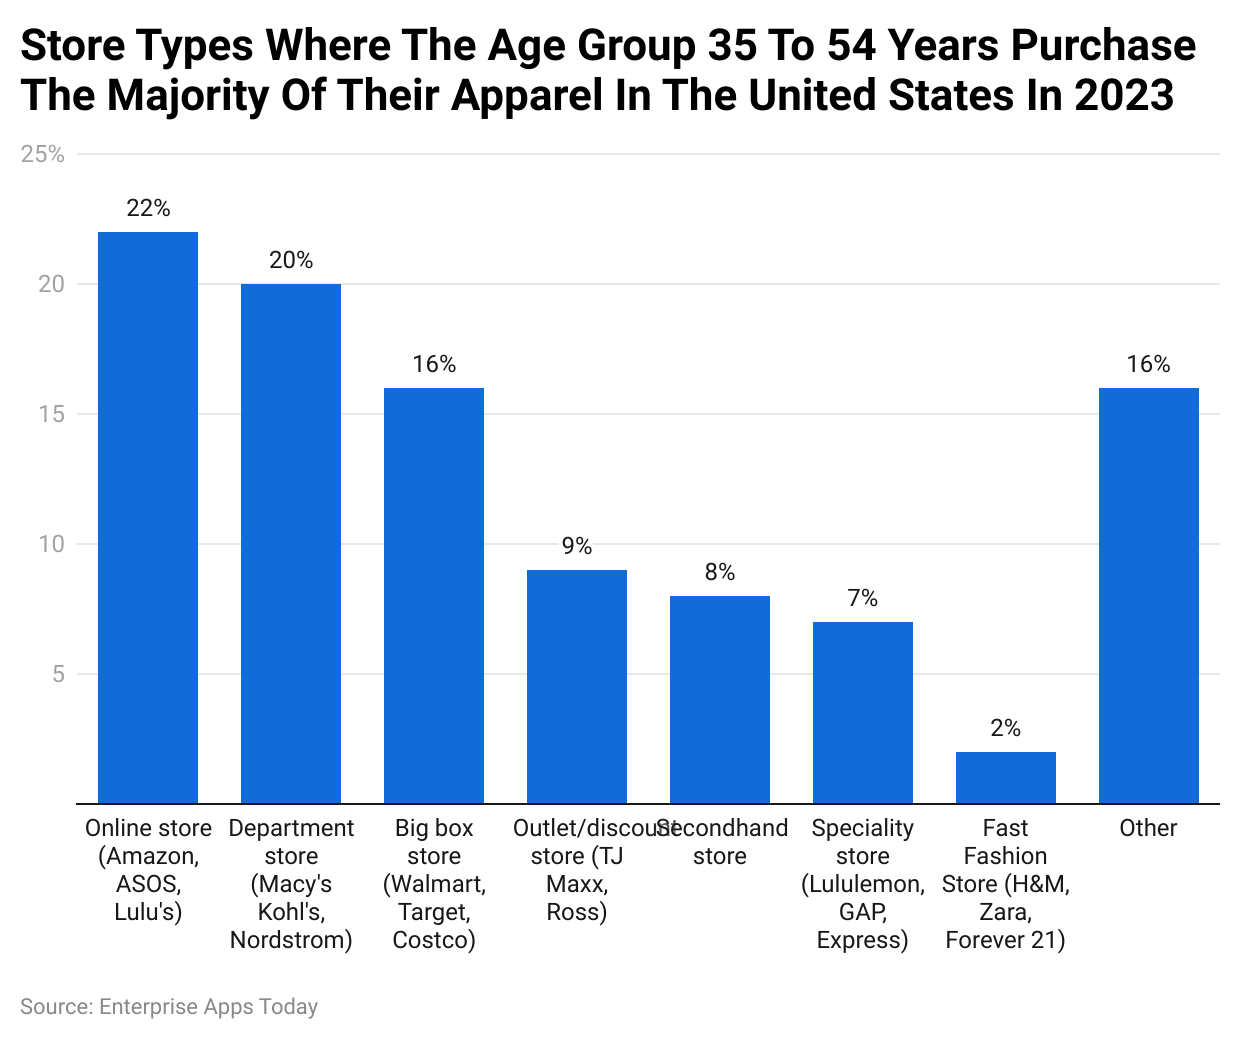 Store types where the age group 35 to 54 years purchase the majority of their apparel in the United States in 2023